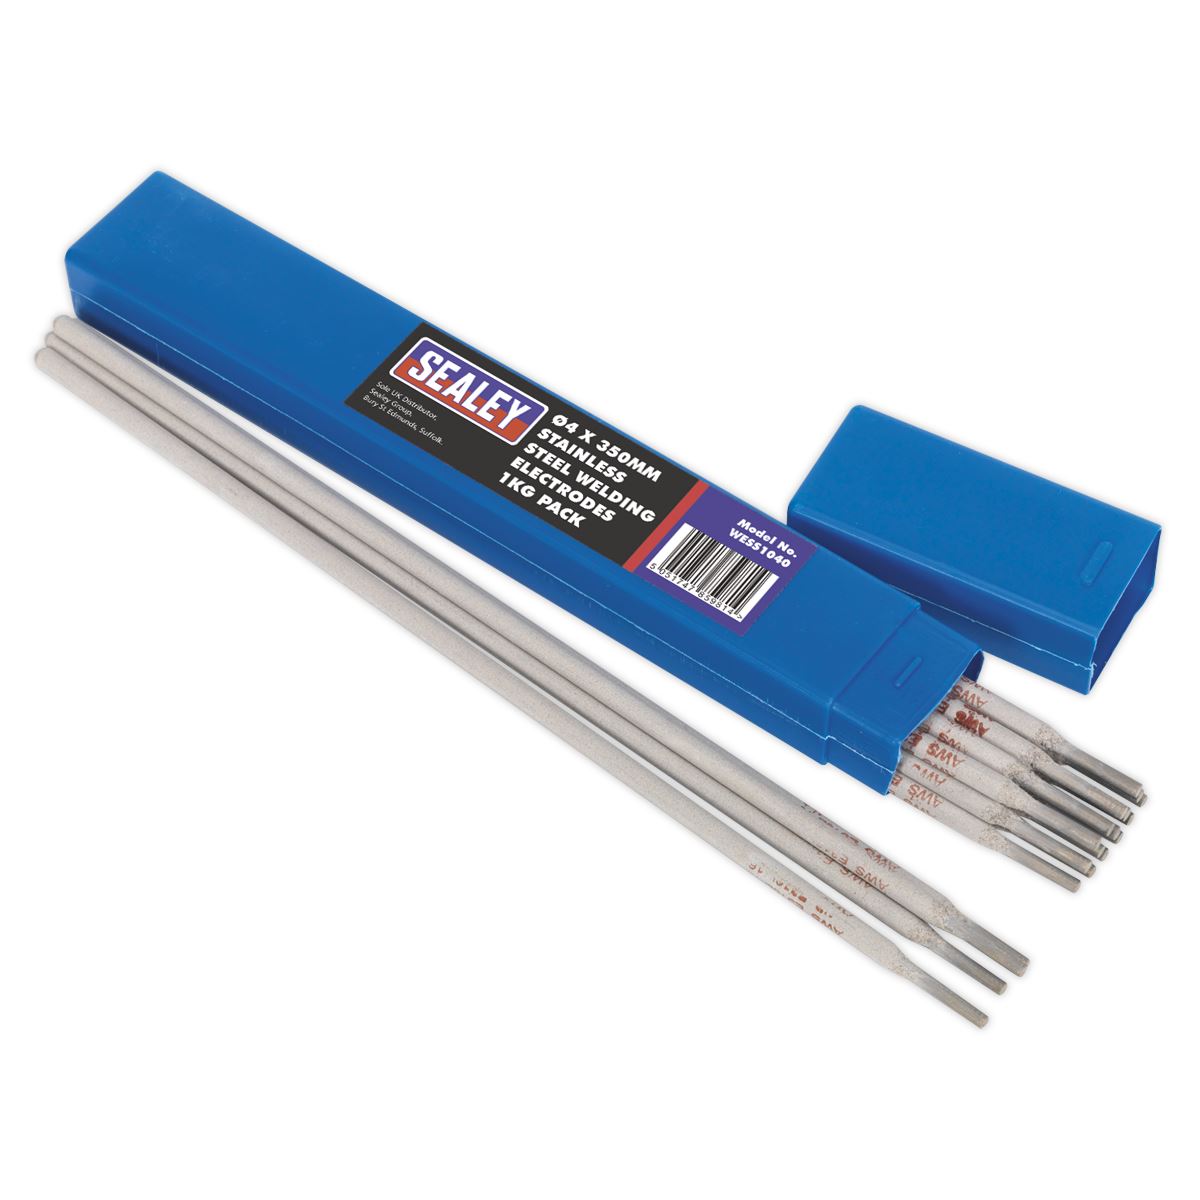 Sealey Welding Electrodes Stainless Steel Ø4 x 350mm 1kg Pack